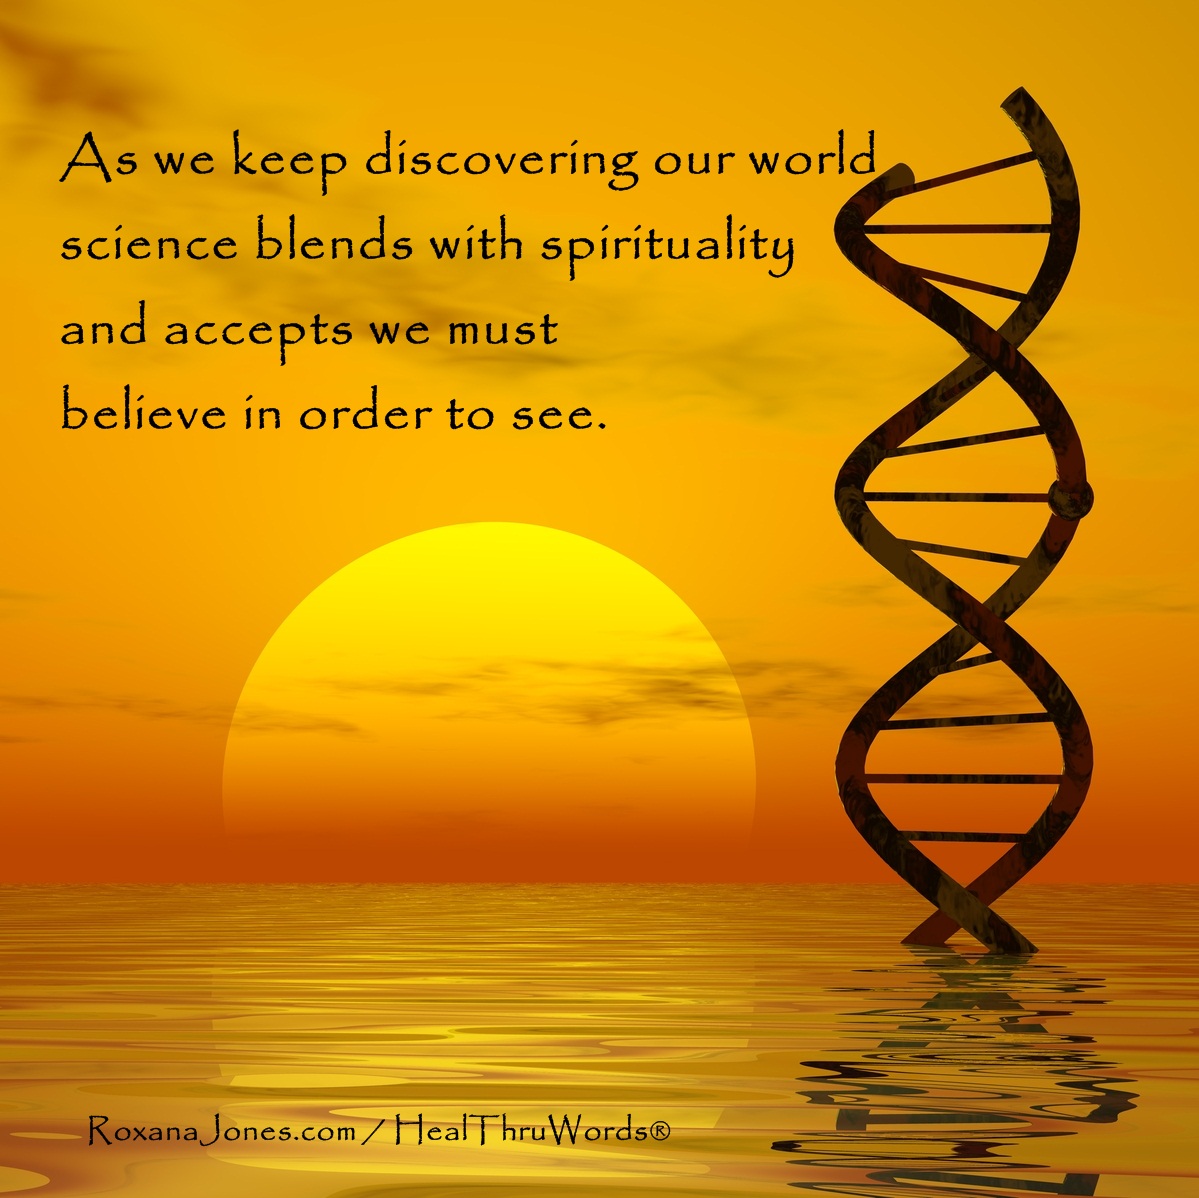 As We Keep Discovering Our World Science Blends With Spirituality And Accept We Must Believe In Order To See.